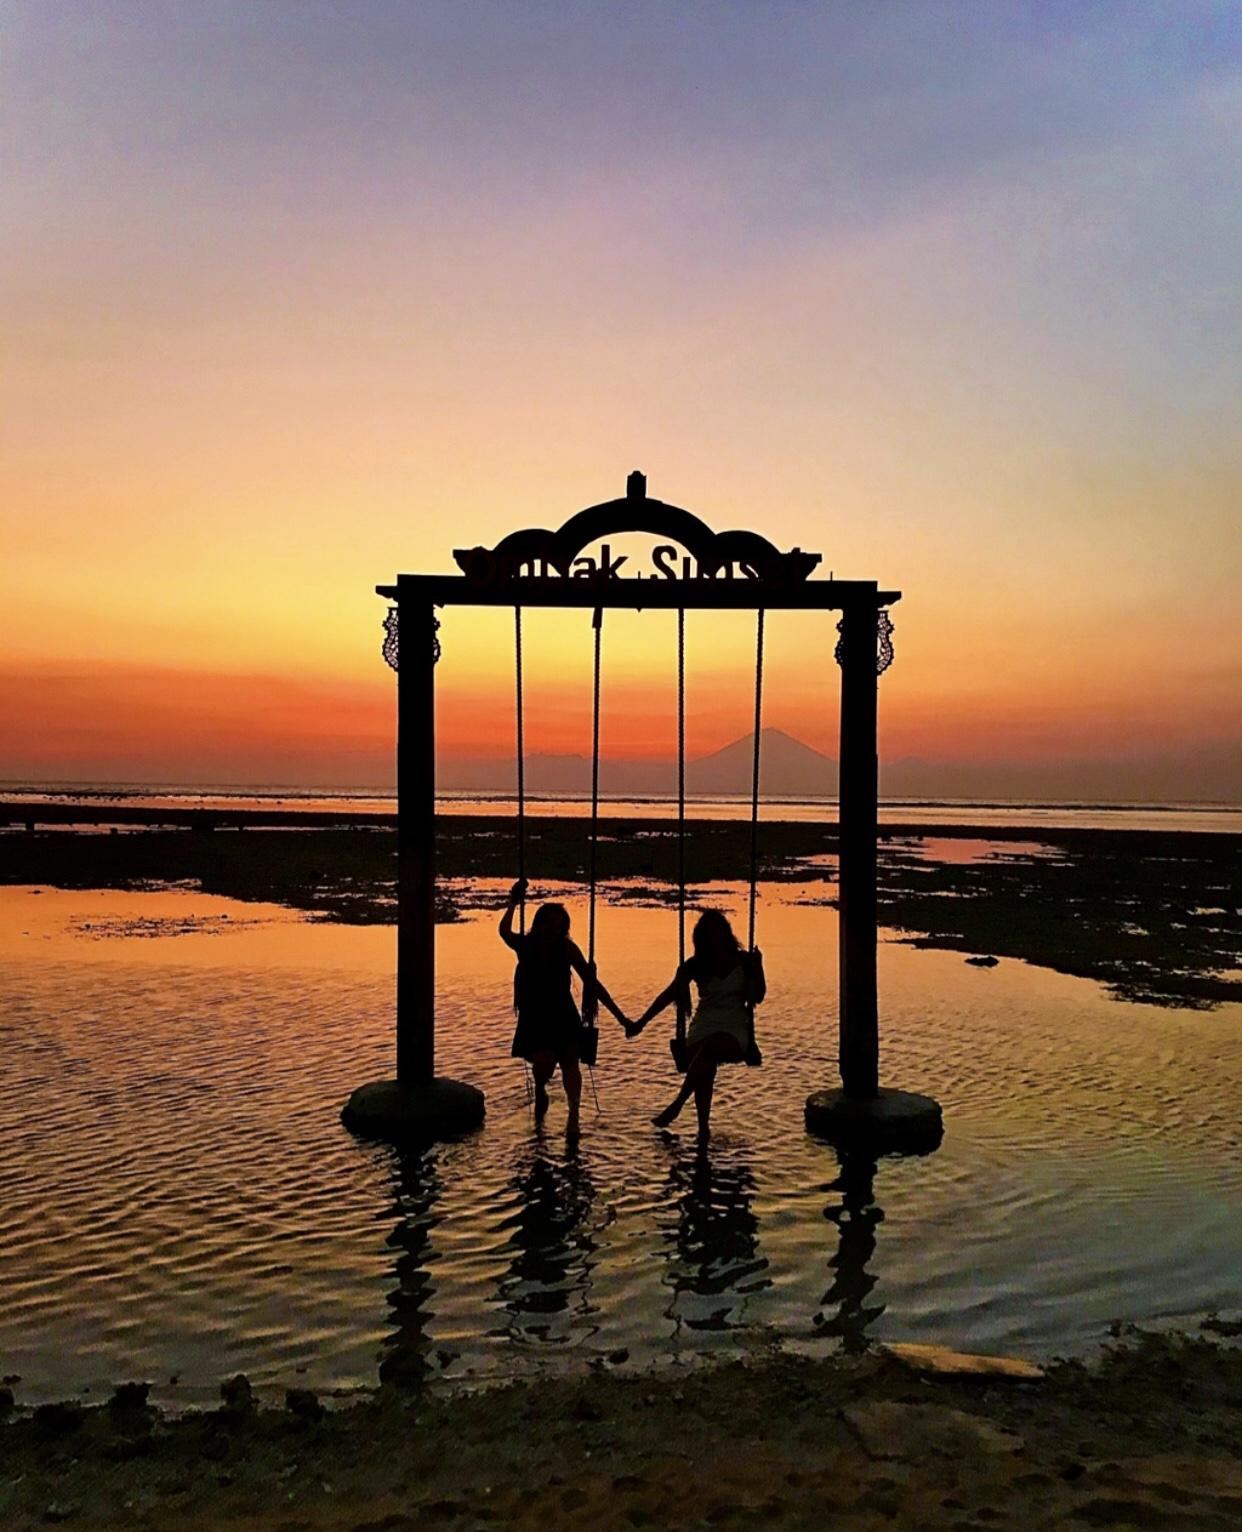 Two girls sitting on a swing in Indonesia at sunset